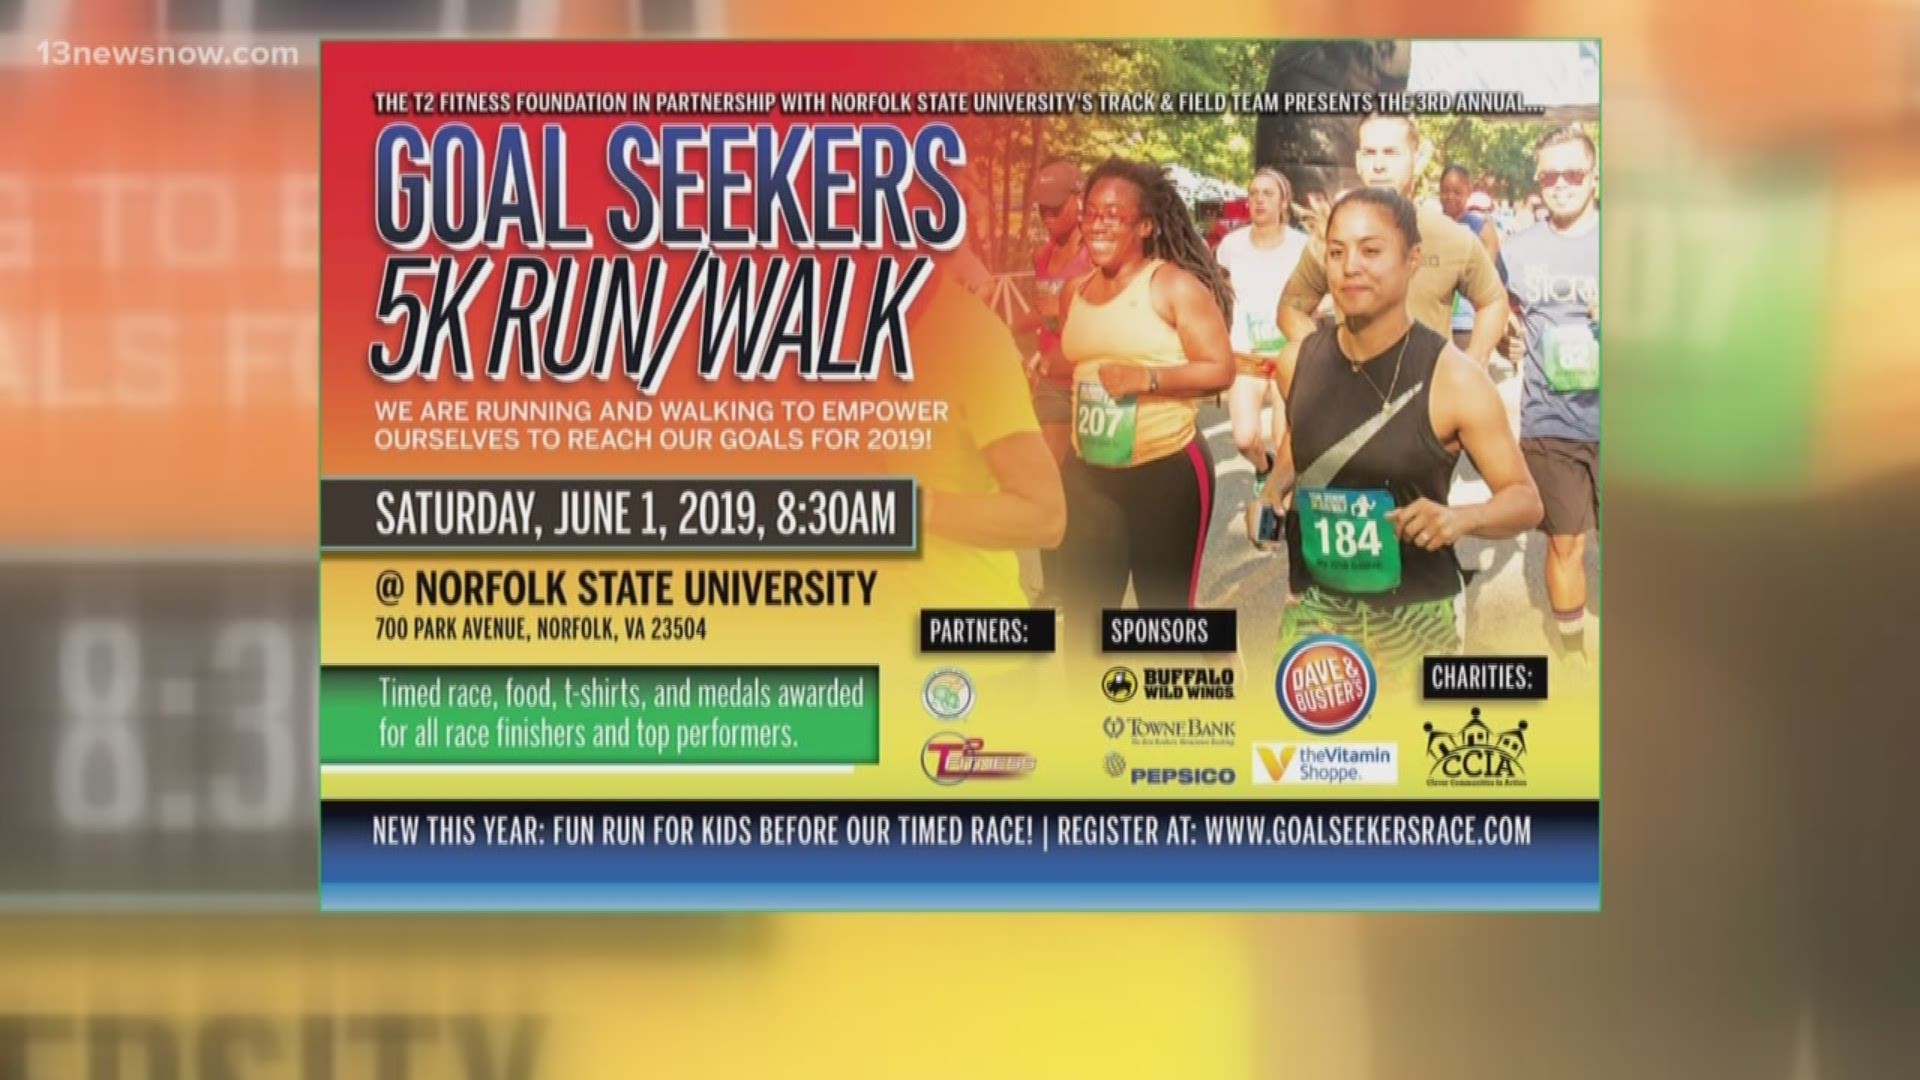 The T2 Fitness Foundation and NSU track & field partner up for the  3rd Annual Goal Seekers 5K Run/Walk on June 1.